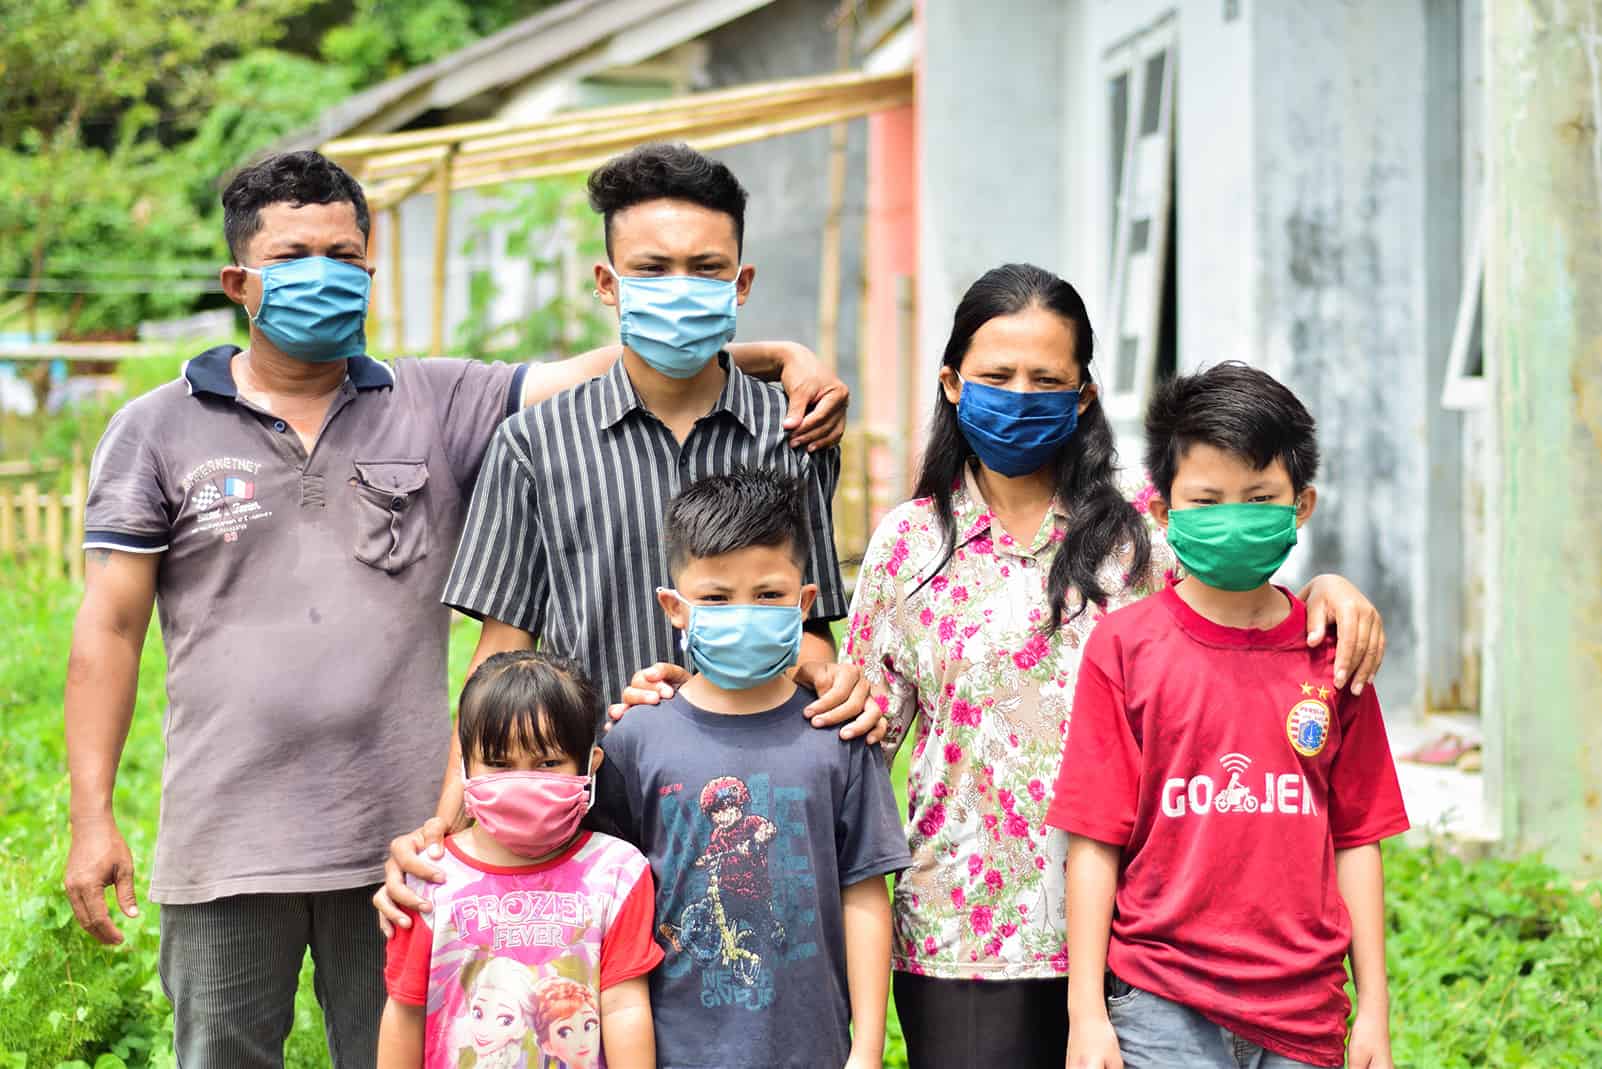 Julius and his family are standing outside of their house and are all wearing masks.